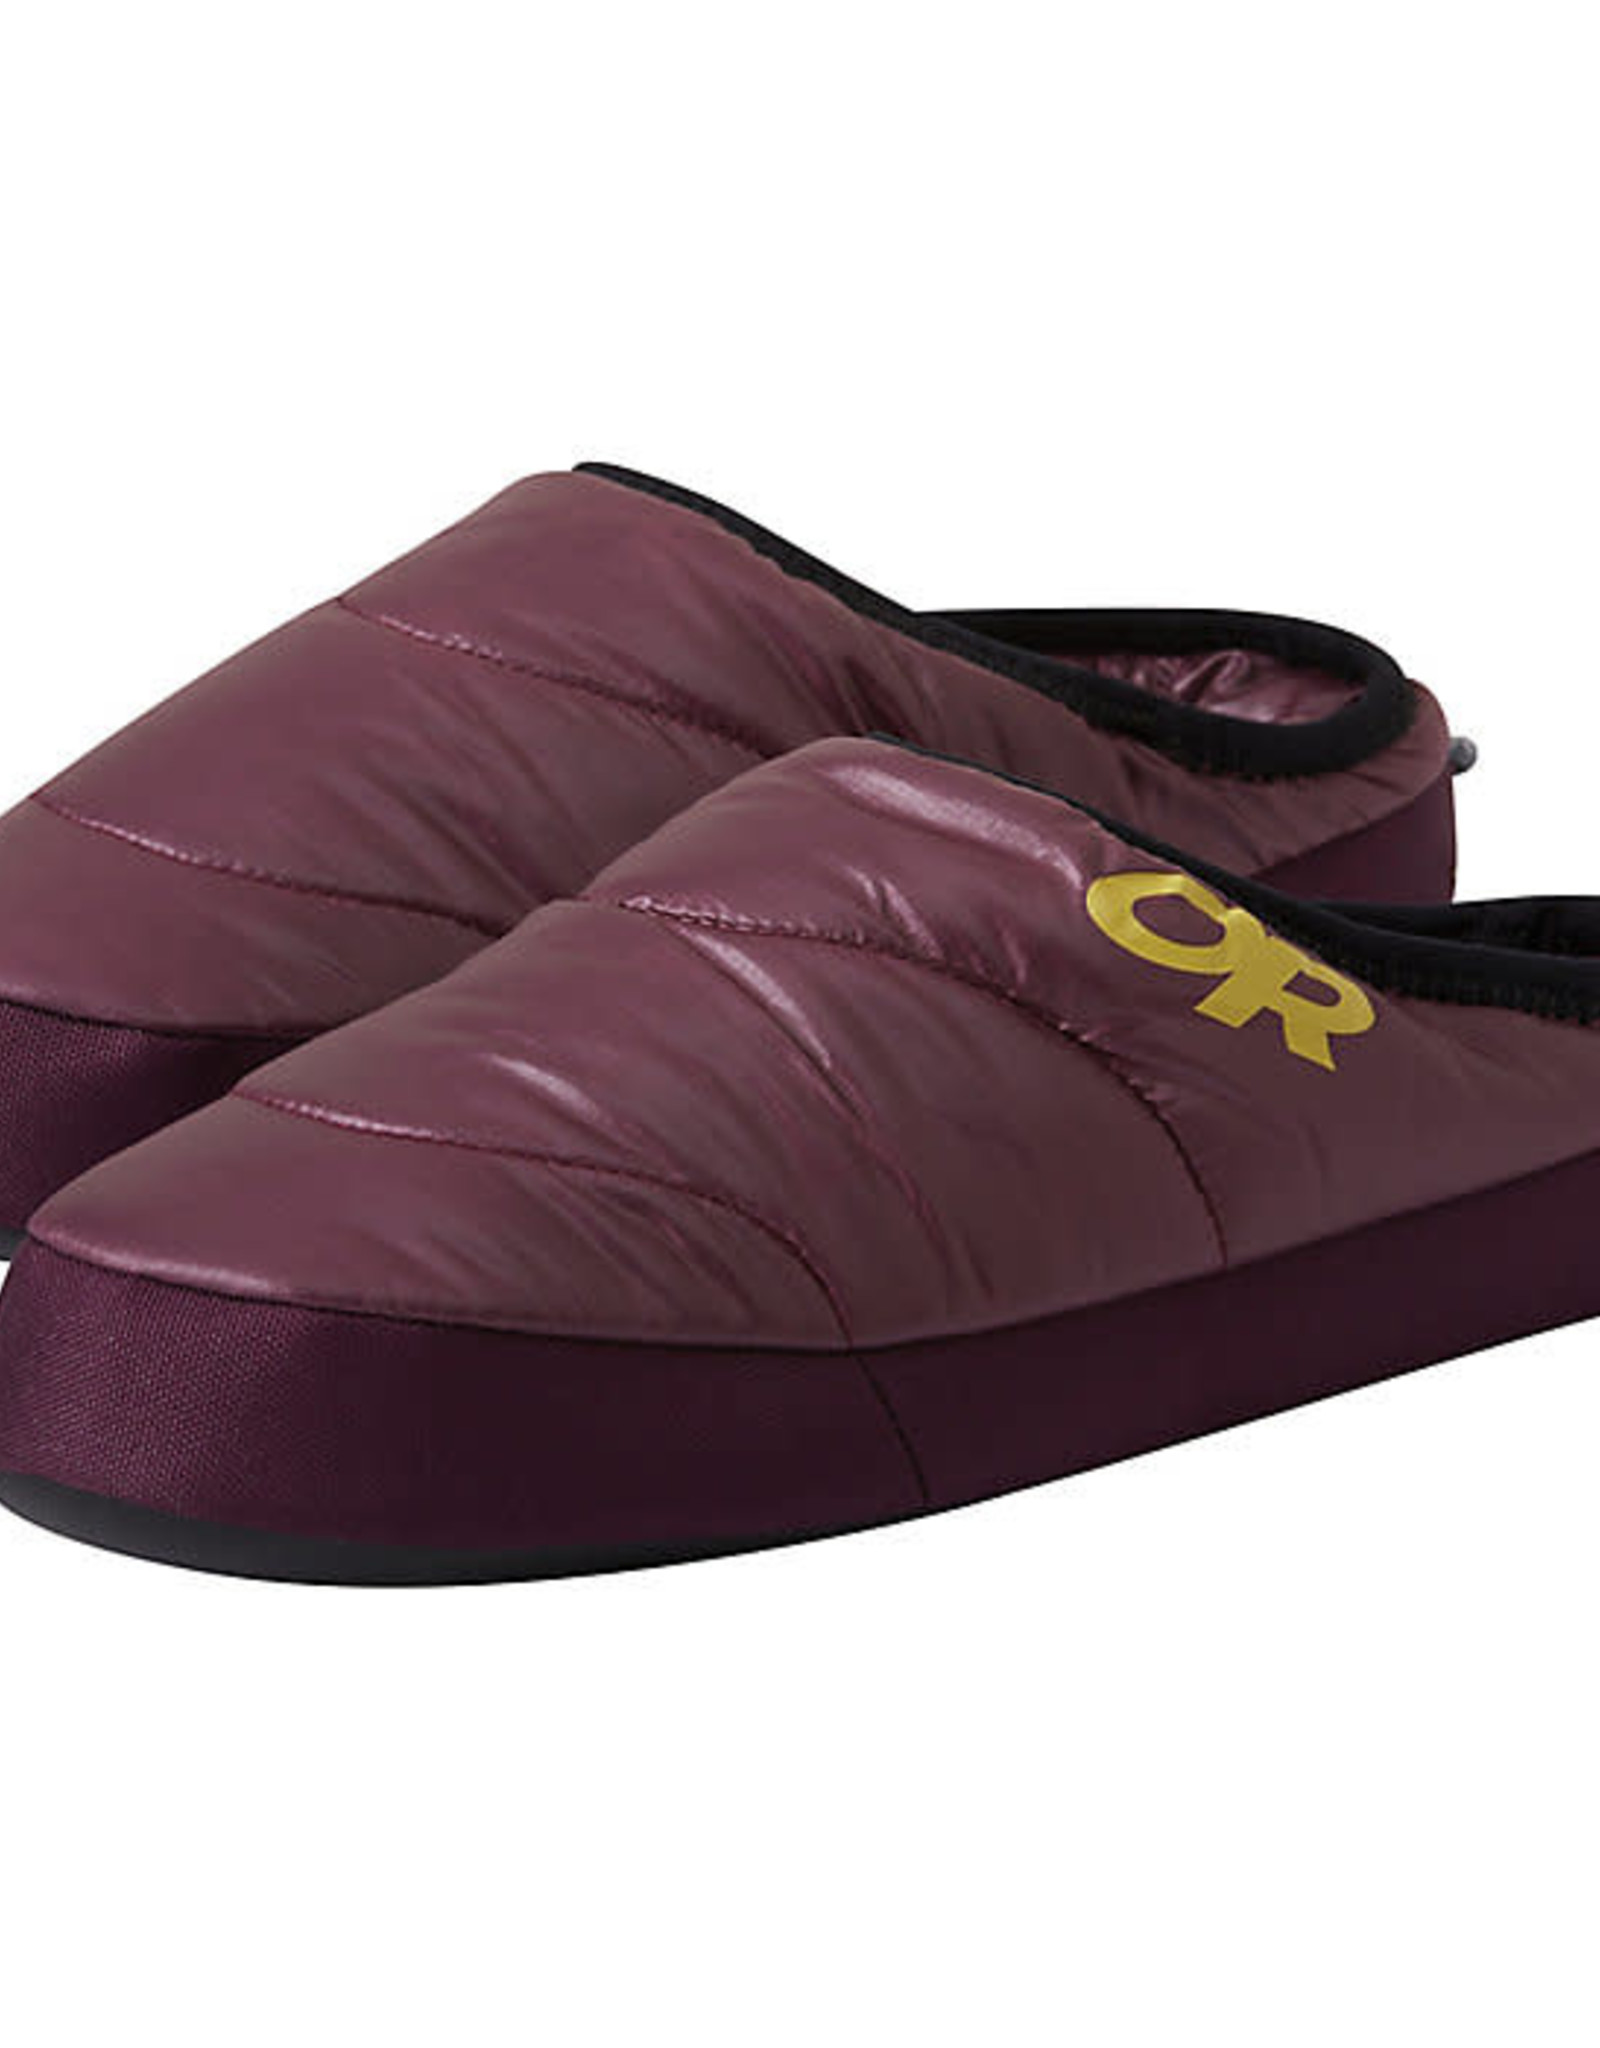 Outdoor Research Outdoor Research M's Tundra Slip-On Aerogel Booties